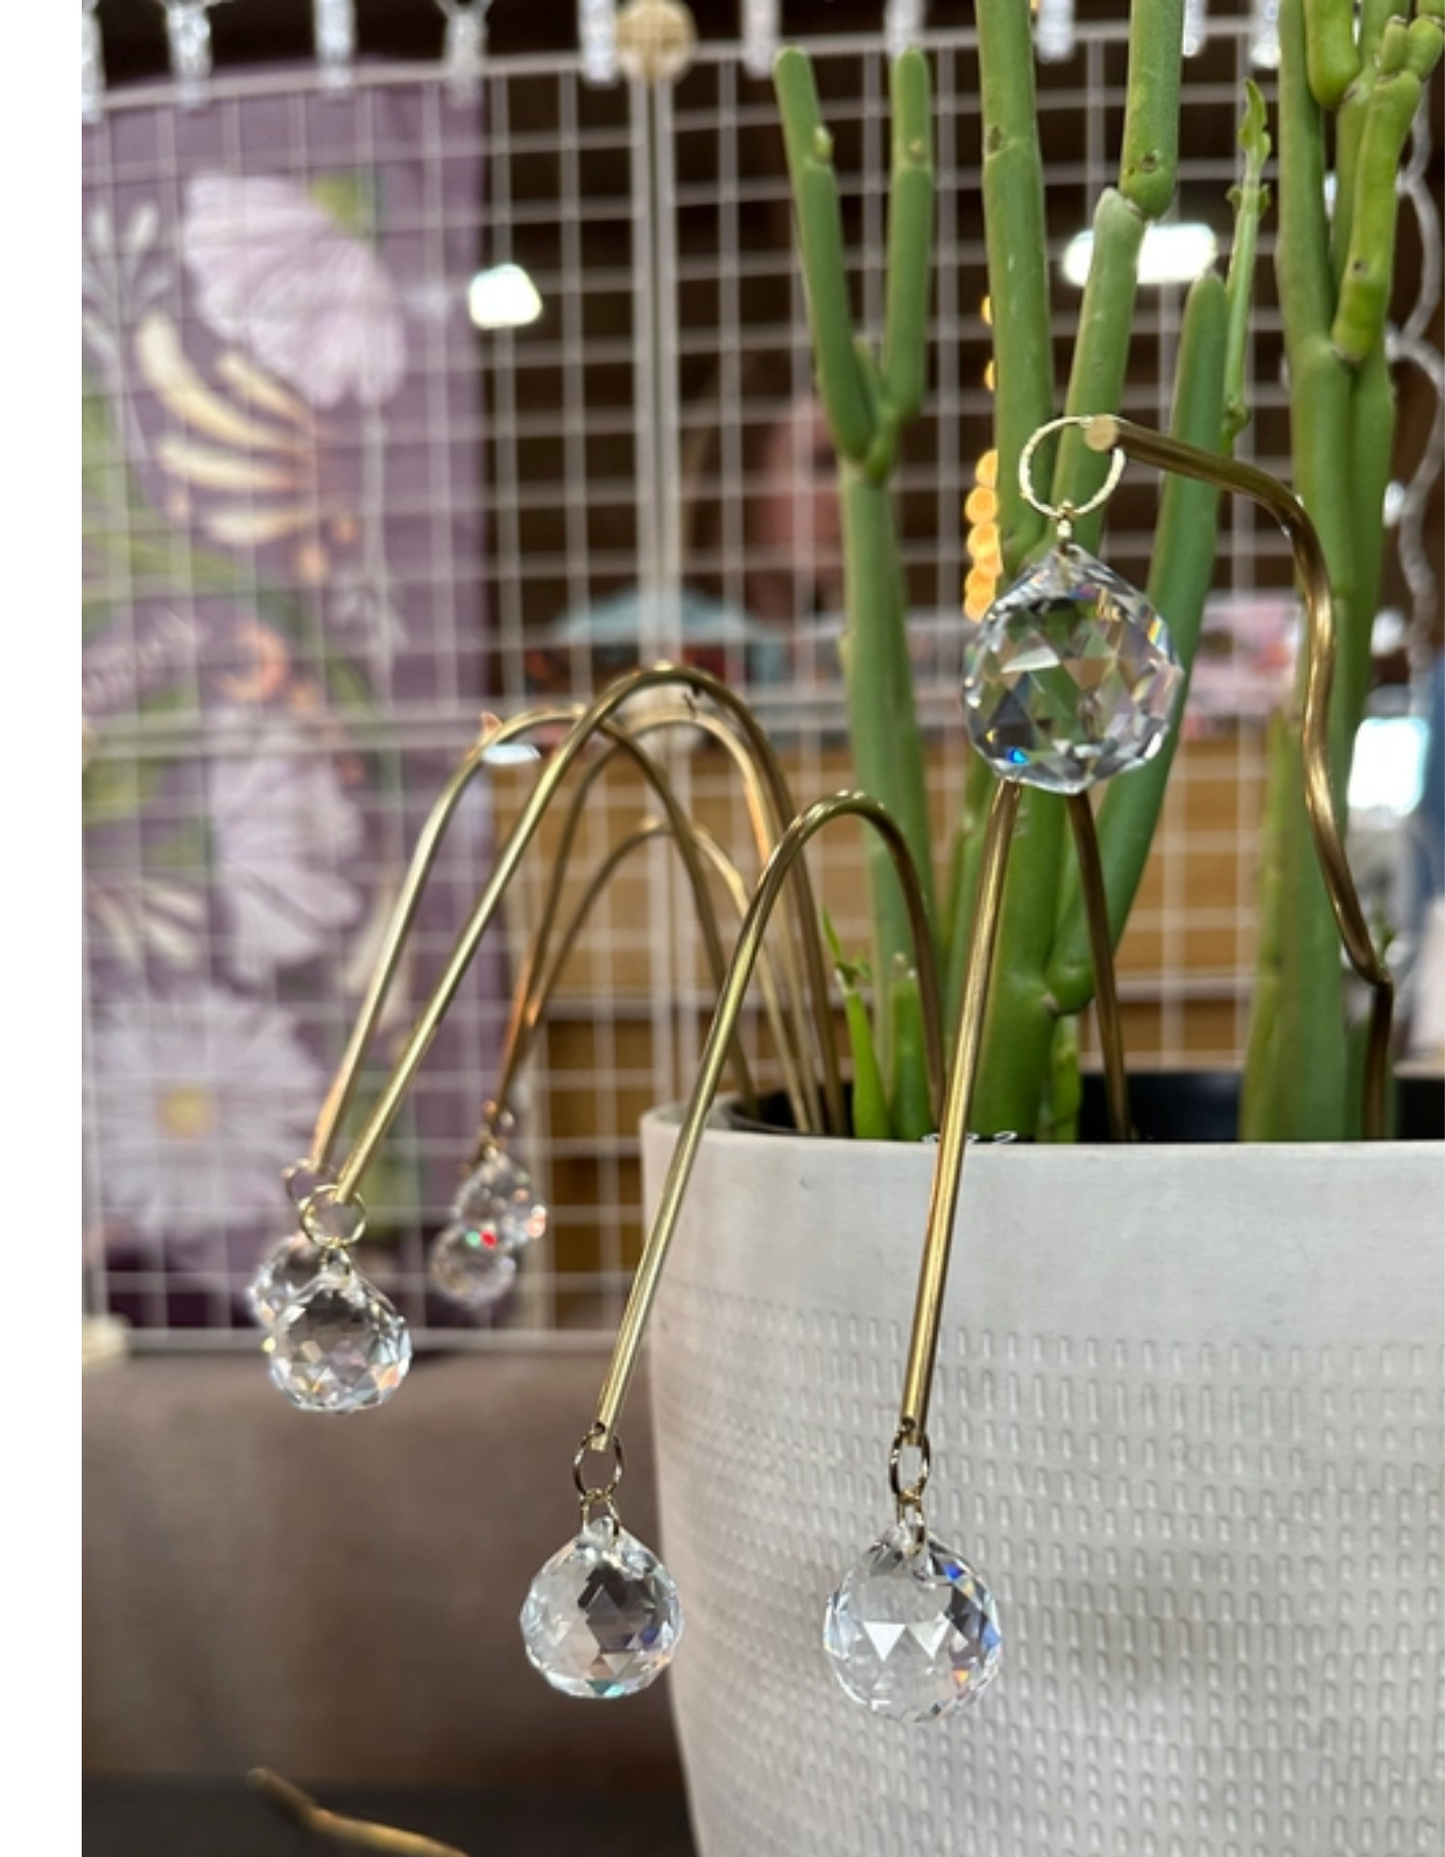 Arched Plant Stake Sun Catcher